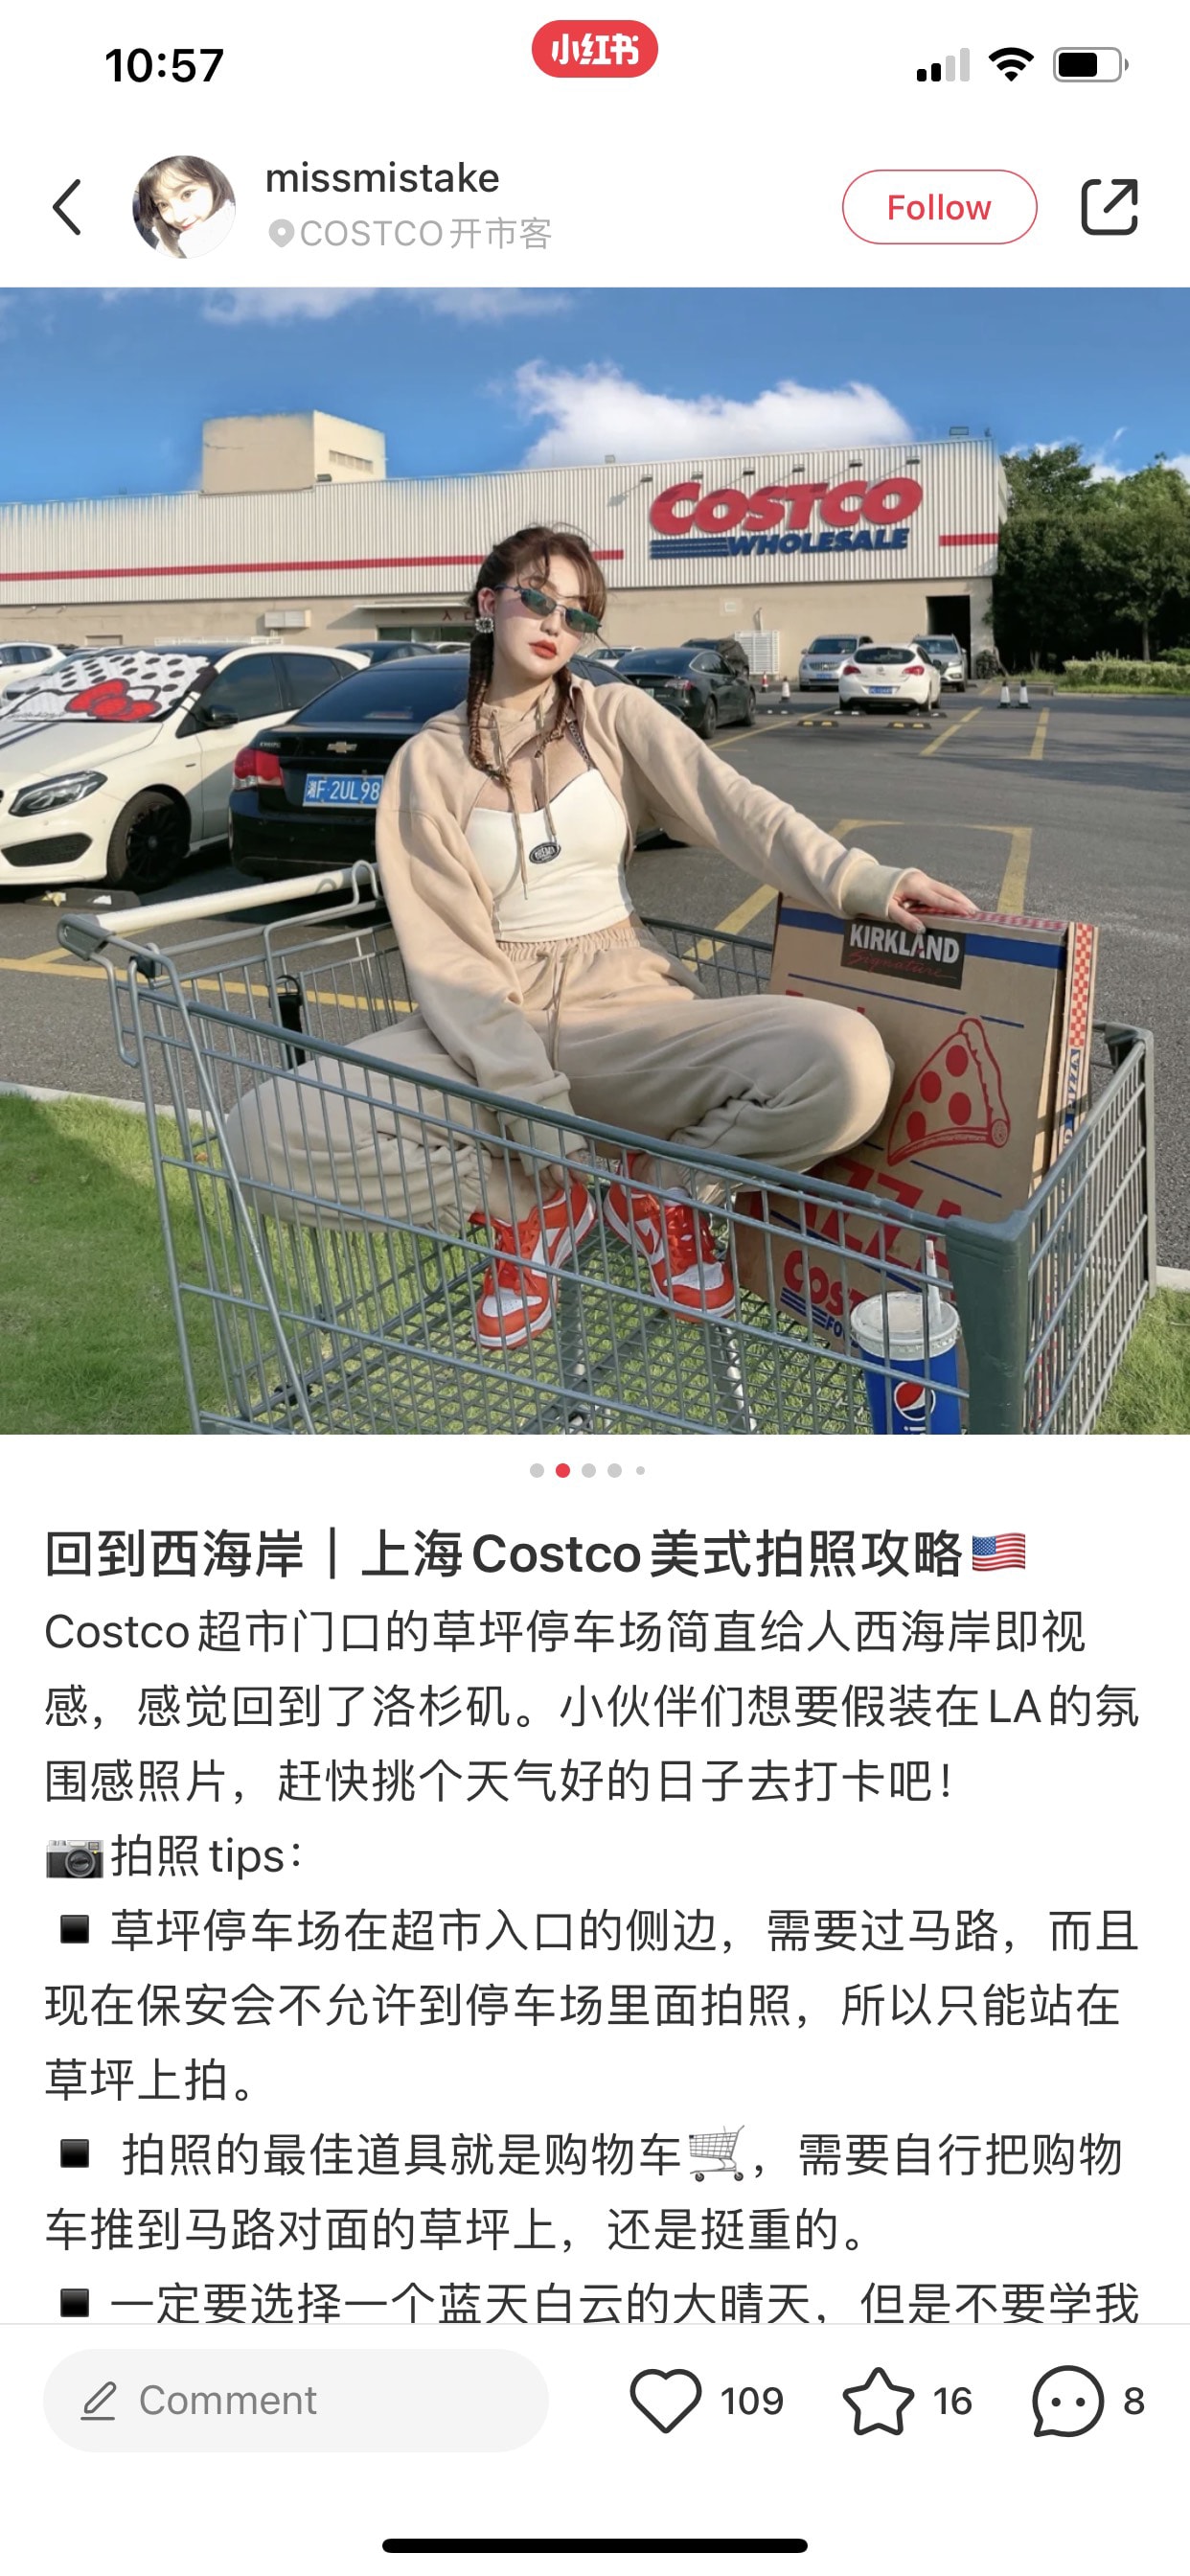 Hermes, Versace and more: Video reveals luxurious items available at  Costcos in China